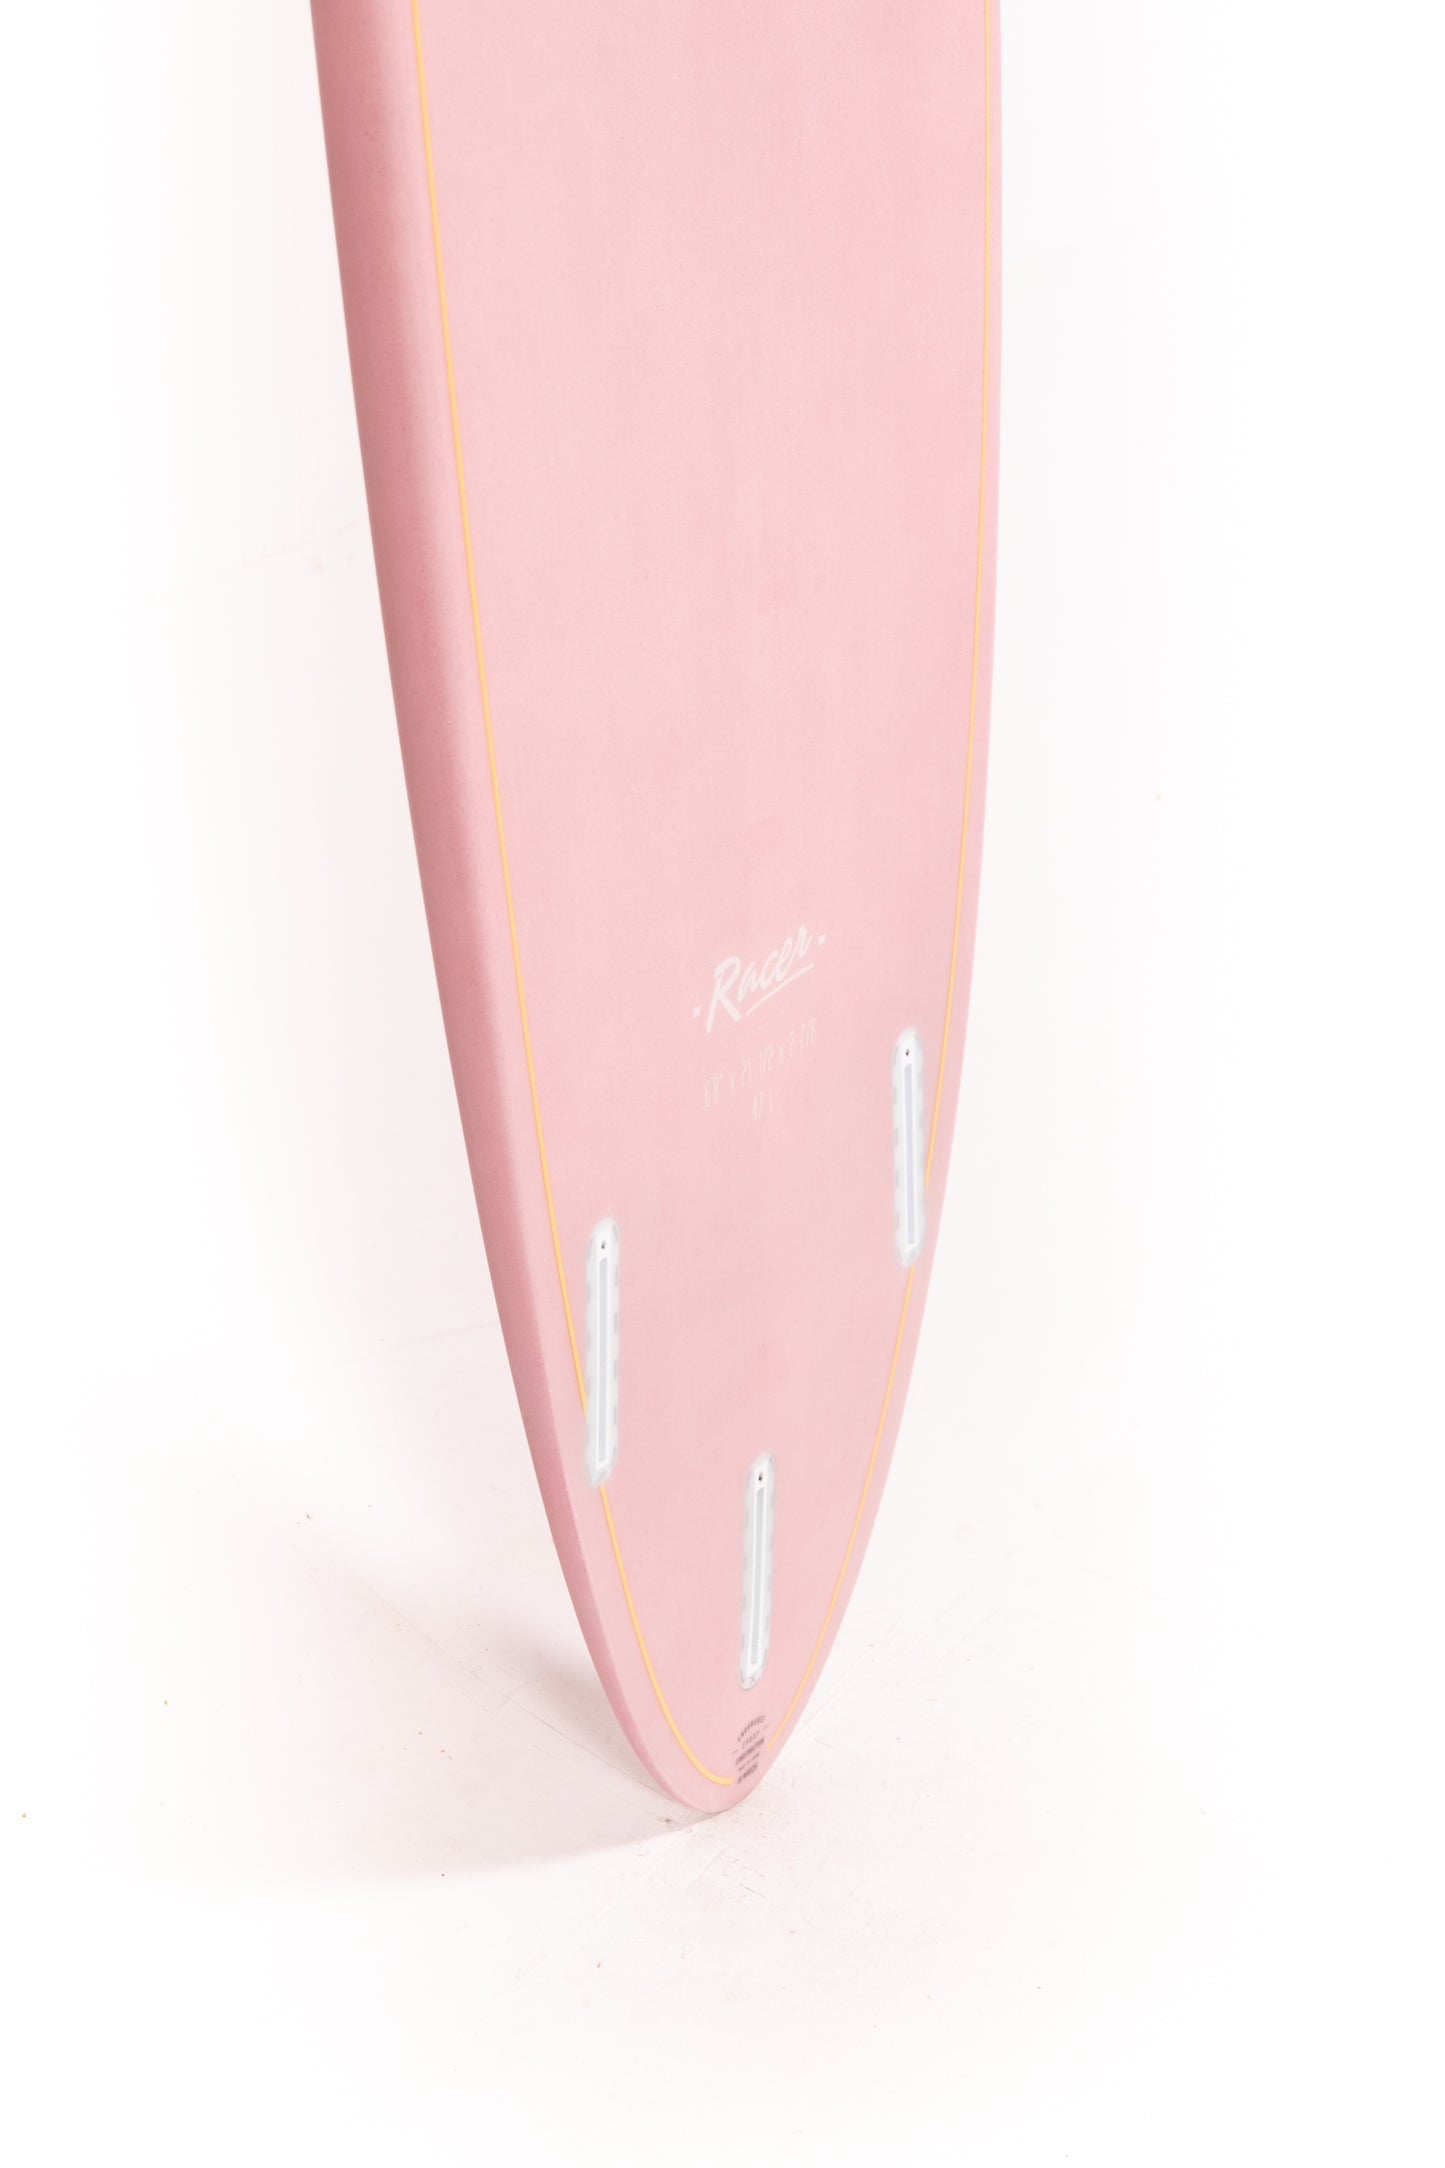 
                  
                    Indio Surfboards - RACER Pink - 6'8" x 21 1/2 x 2 7/8 - 47L
                  
                